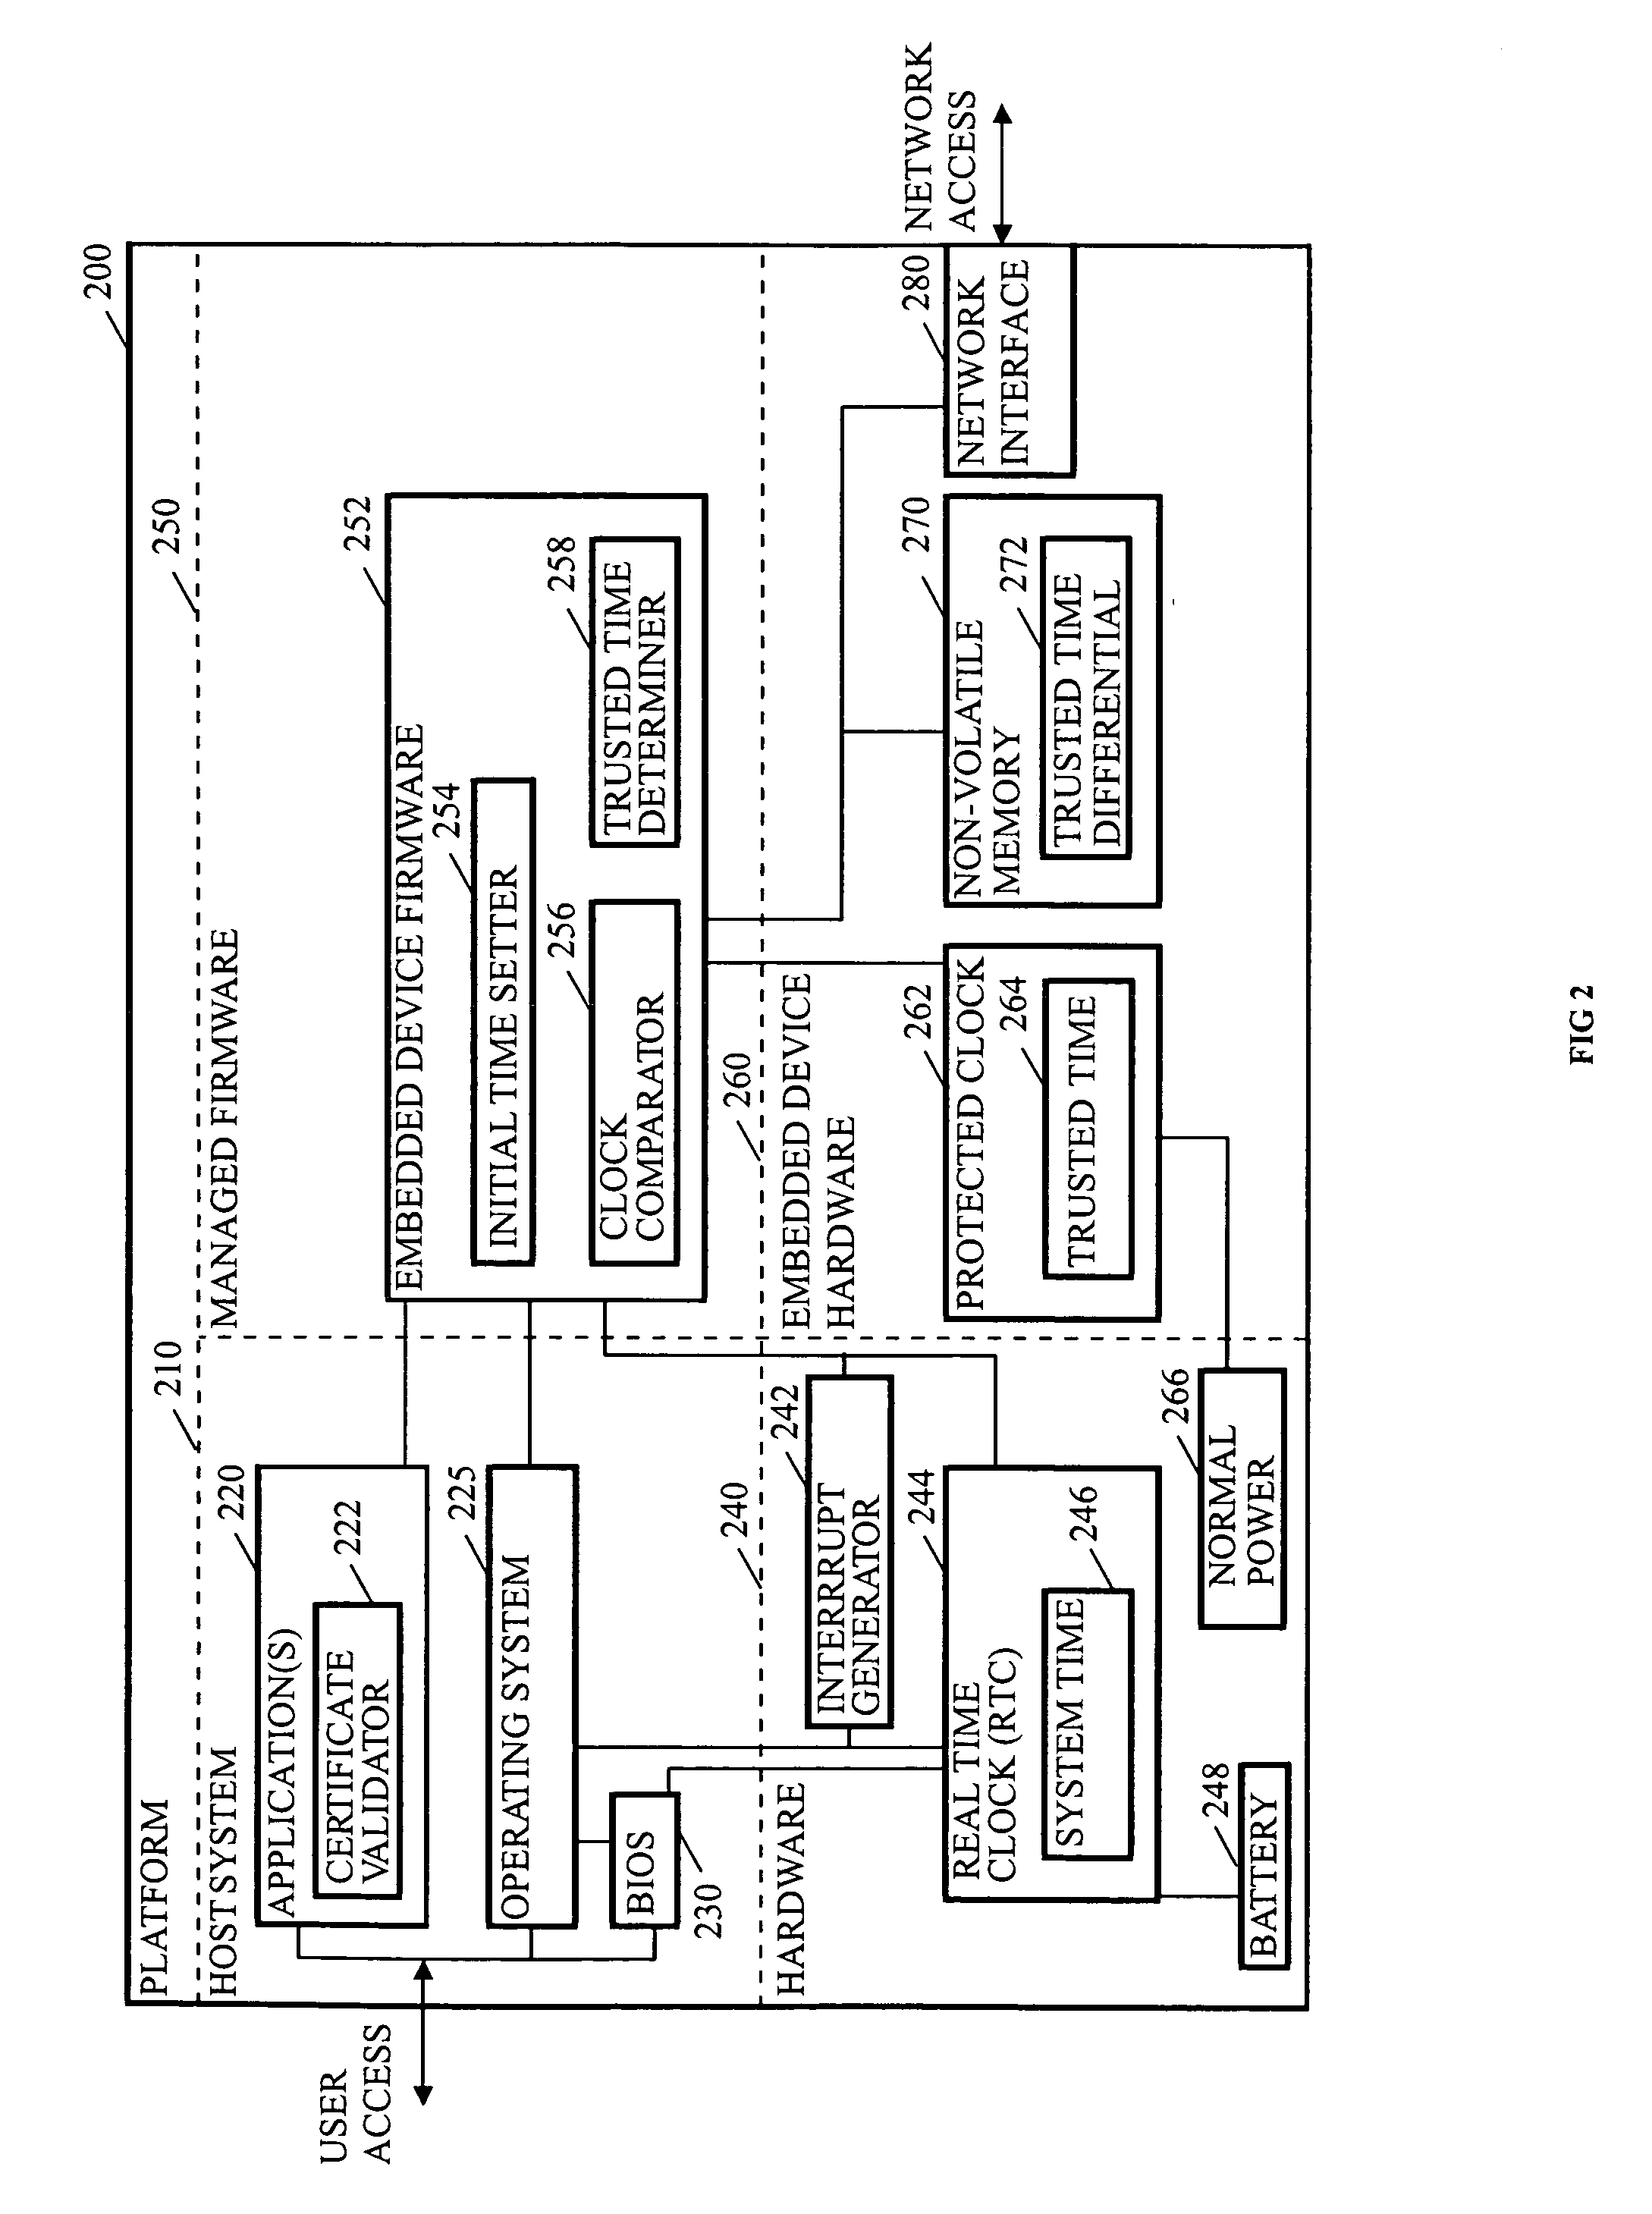 Protected clock management based upon a non-trusted persistent time source